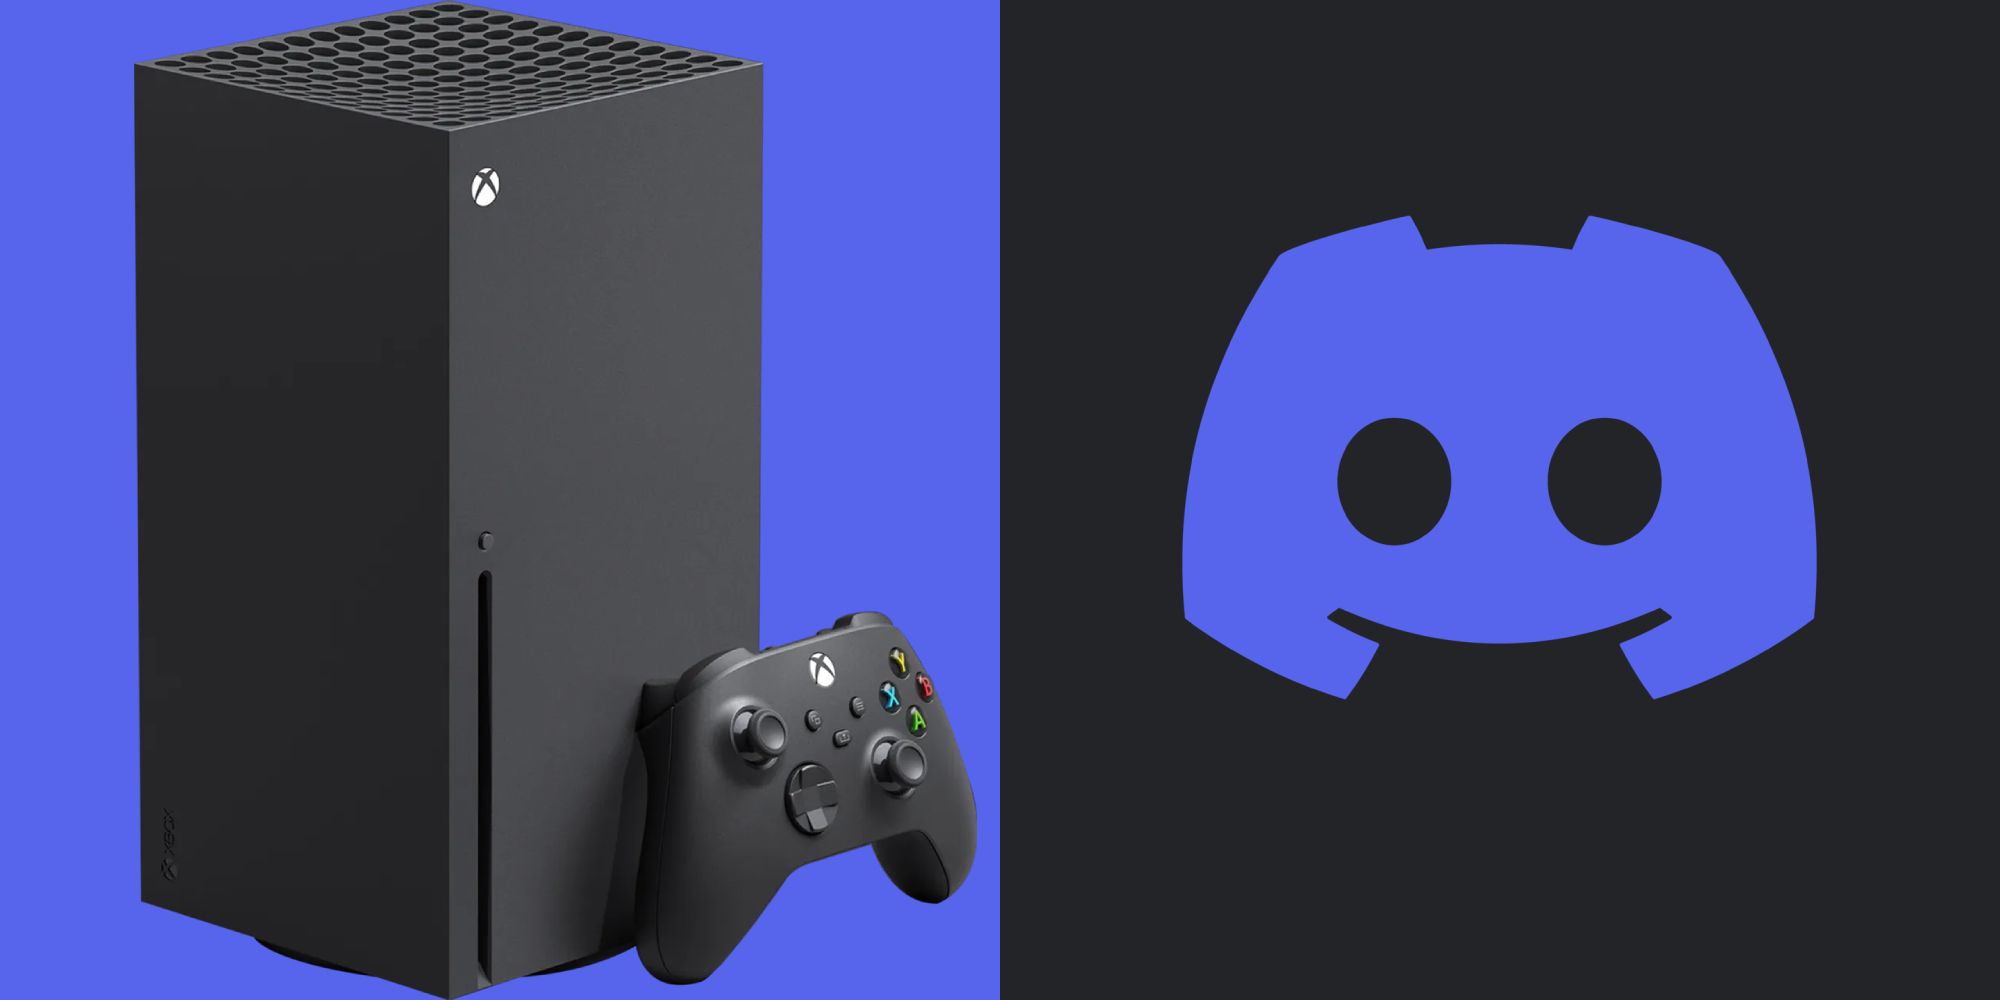 How To Use Discord On Xbox Featured Image Xbox Series X And Discord Logo